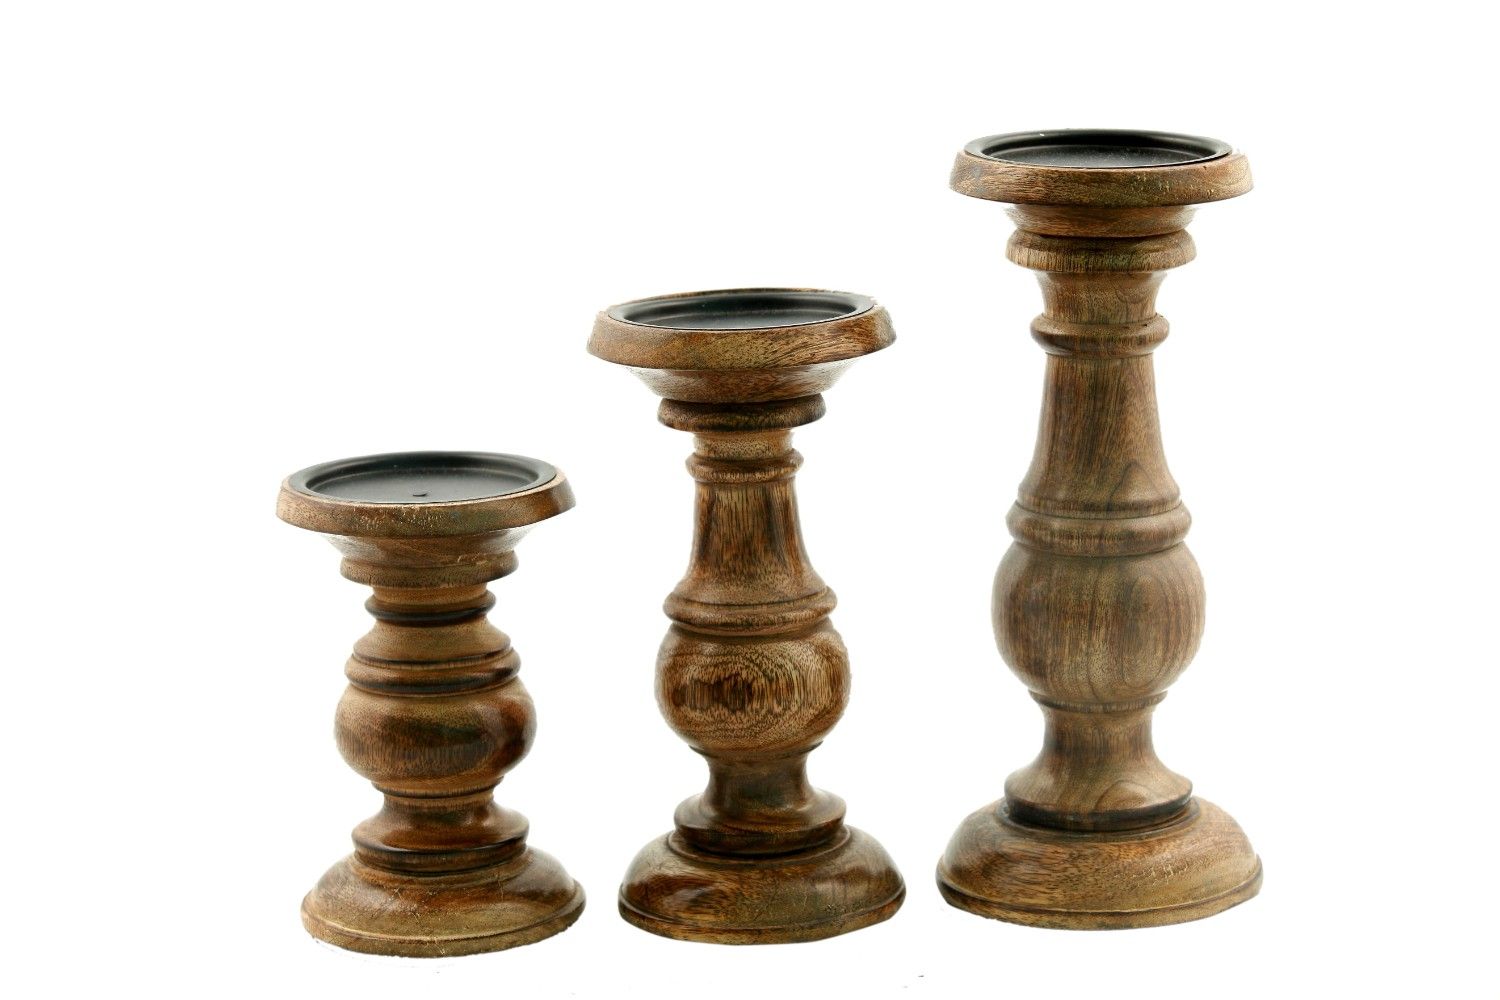 Short And Sweet Wooden Candle Holder Set Of Three In Natural Wood Finish | Walmart (US)